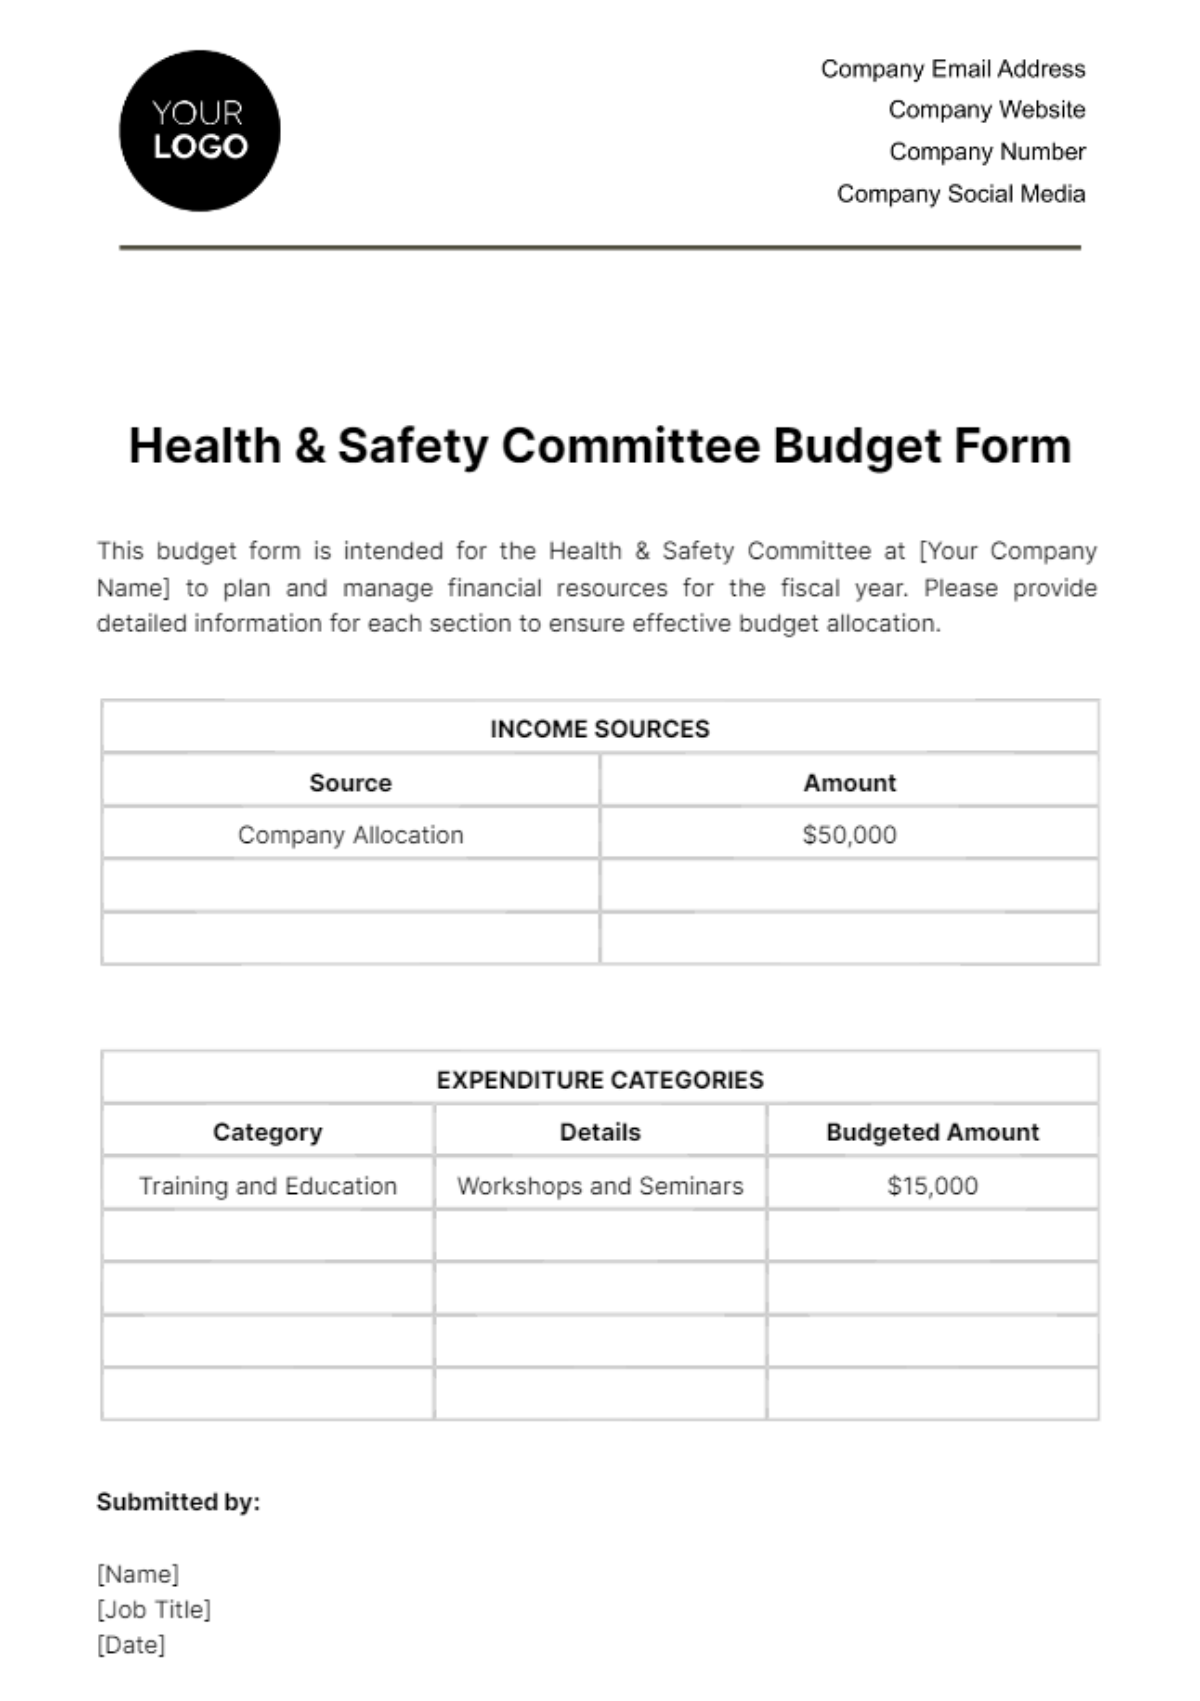 Free Health & Safety Committee Budget Form Template